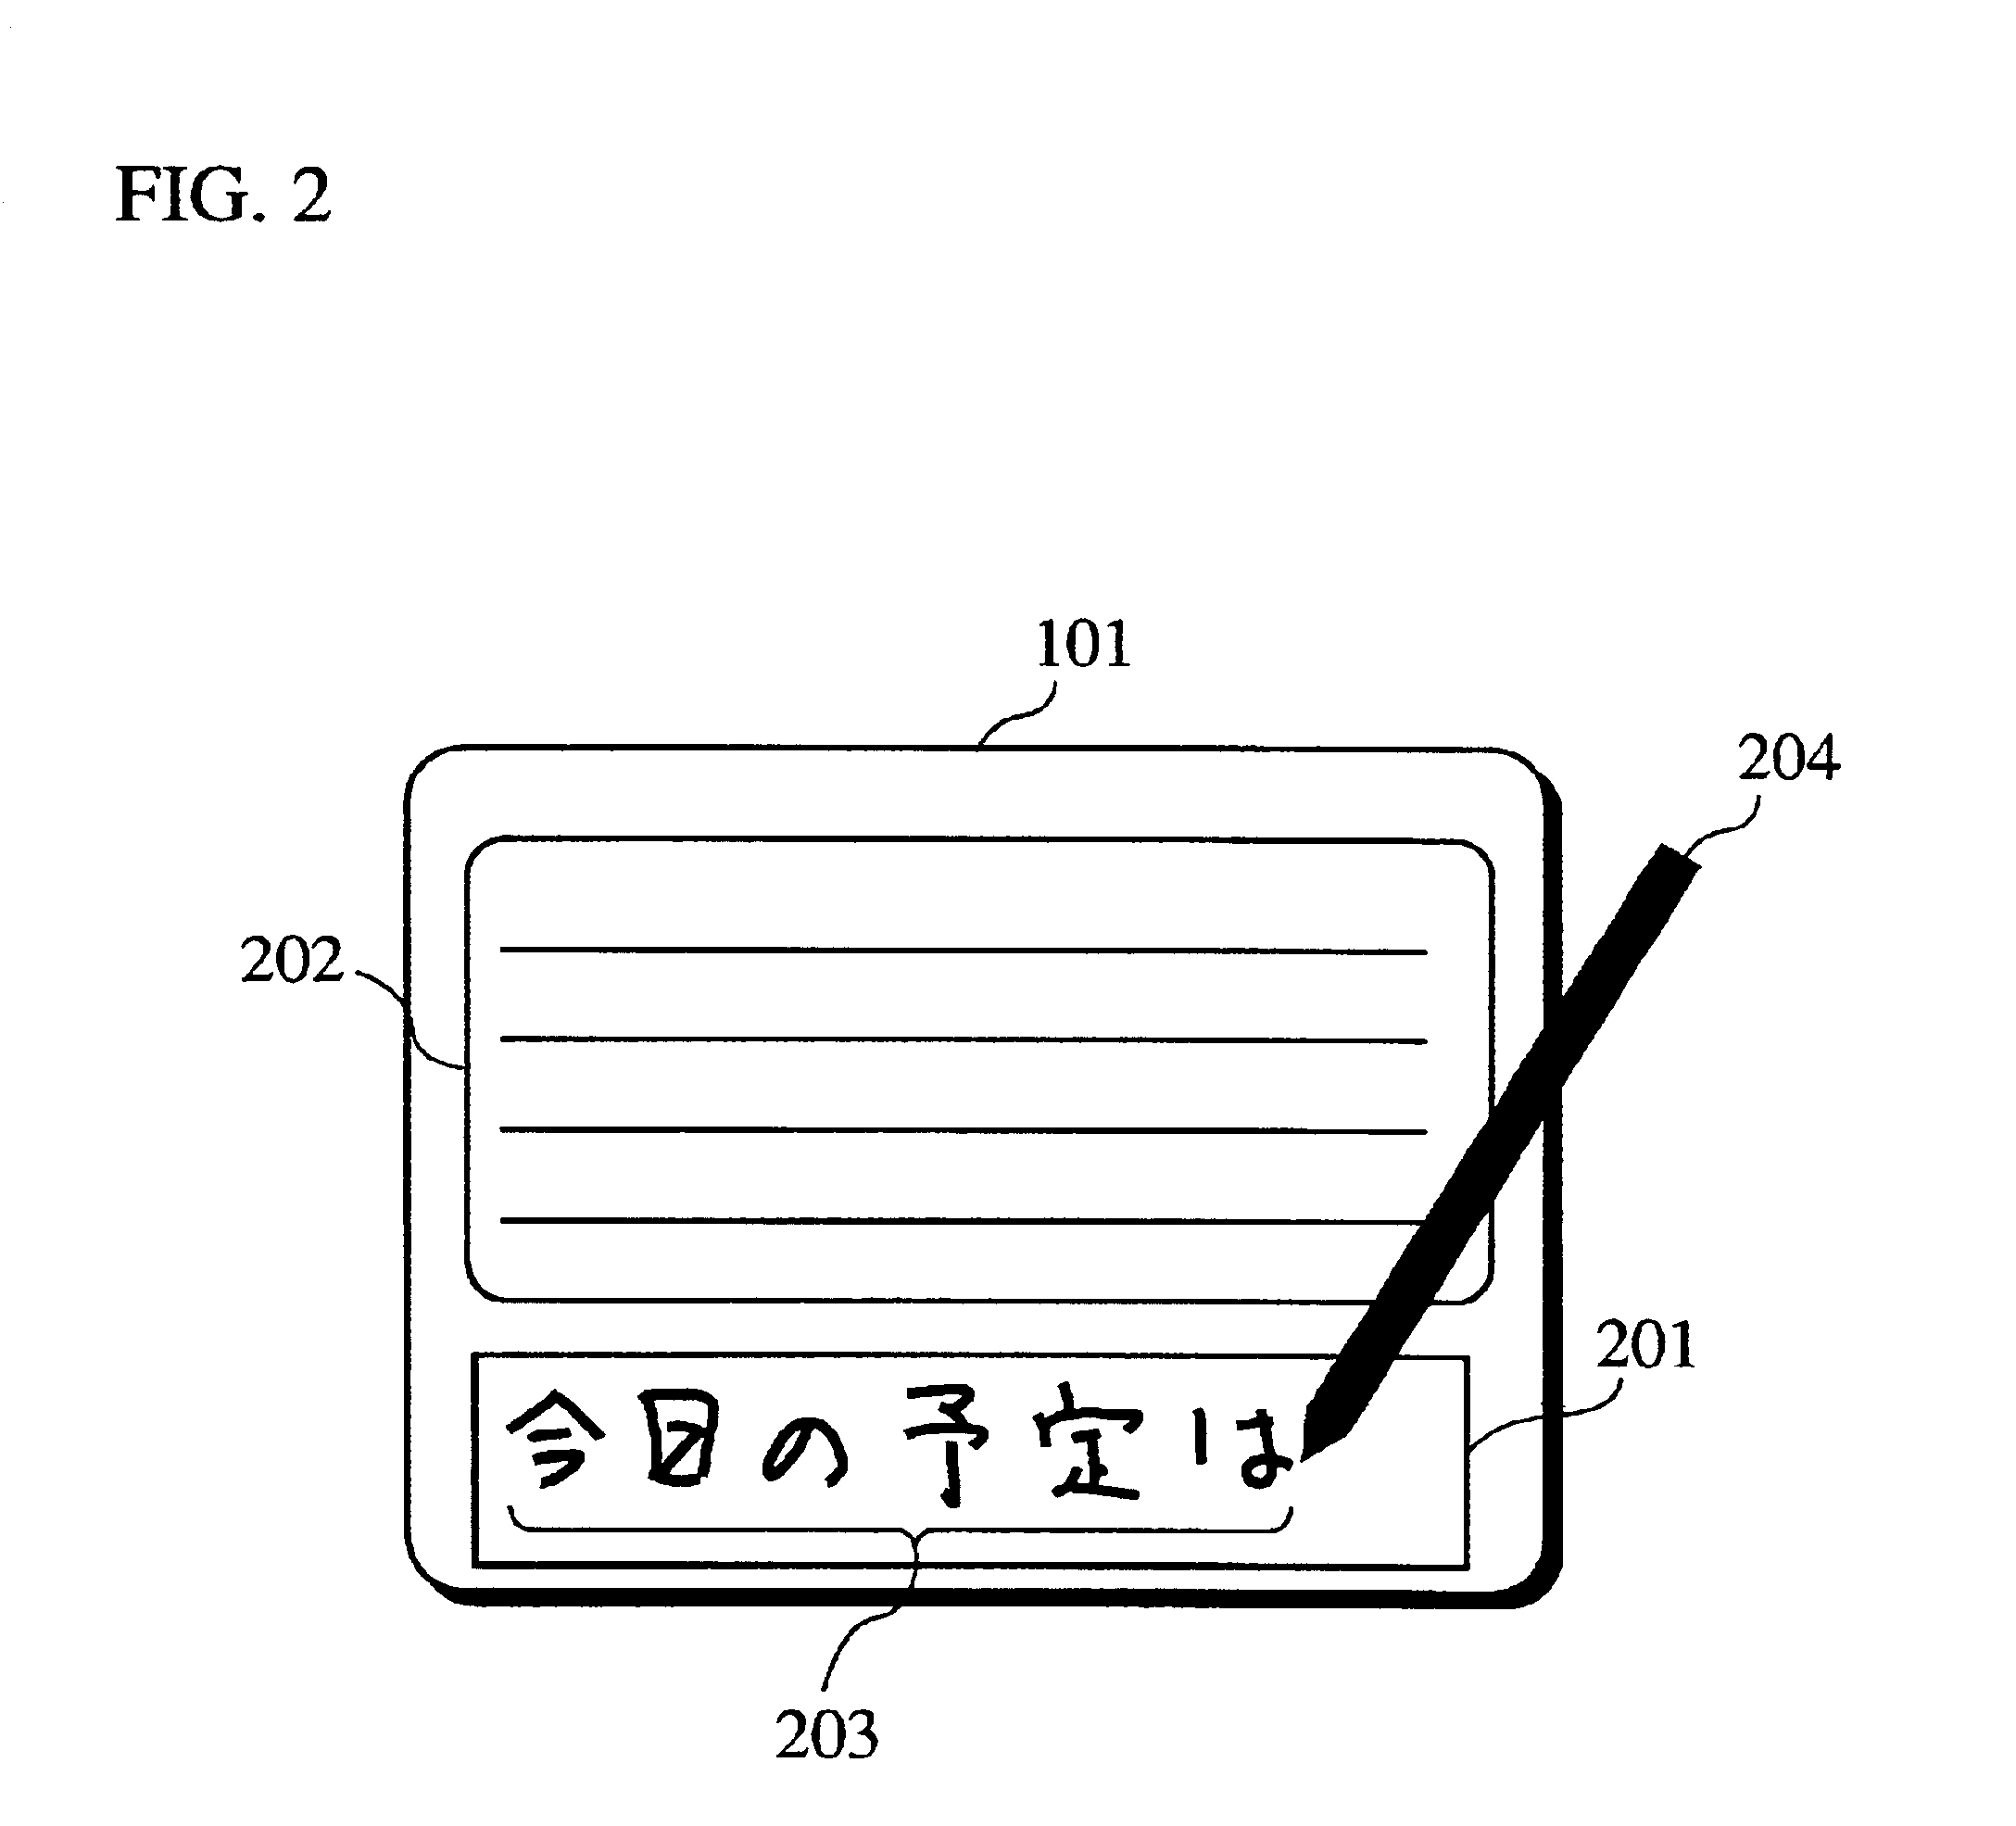 Handwritten character recognition apparatus